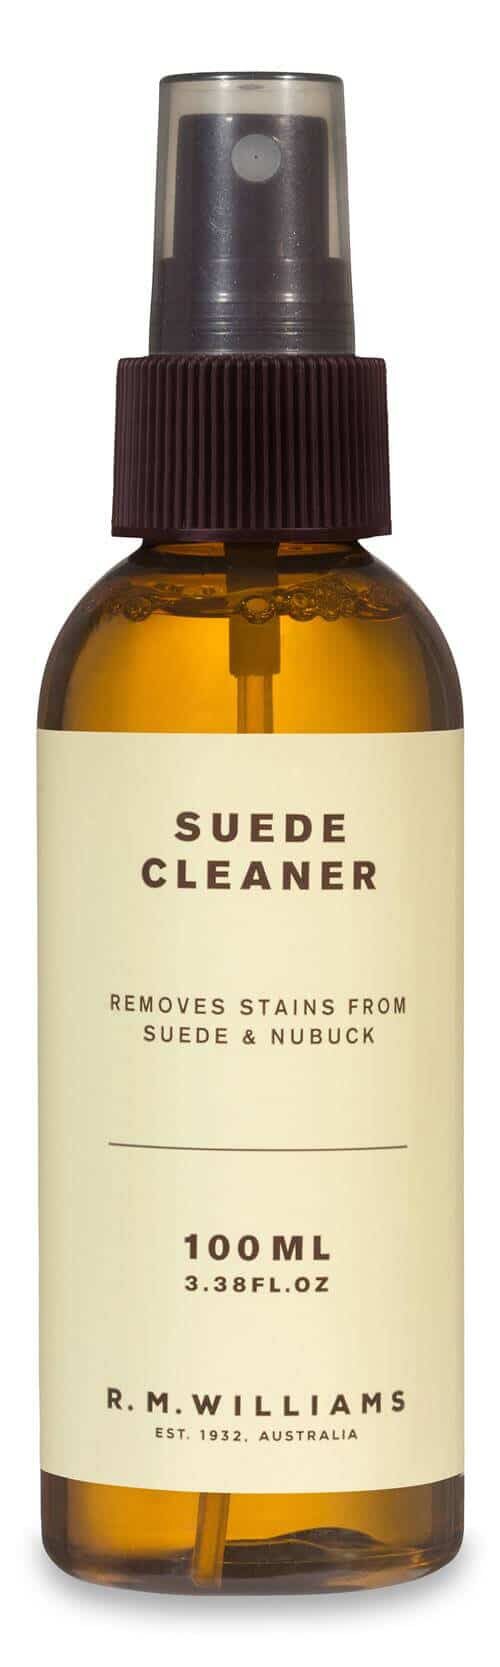 Suede Cleaner